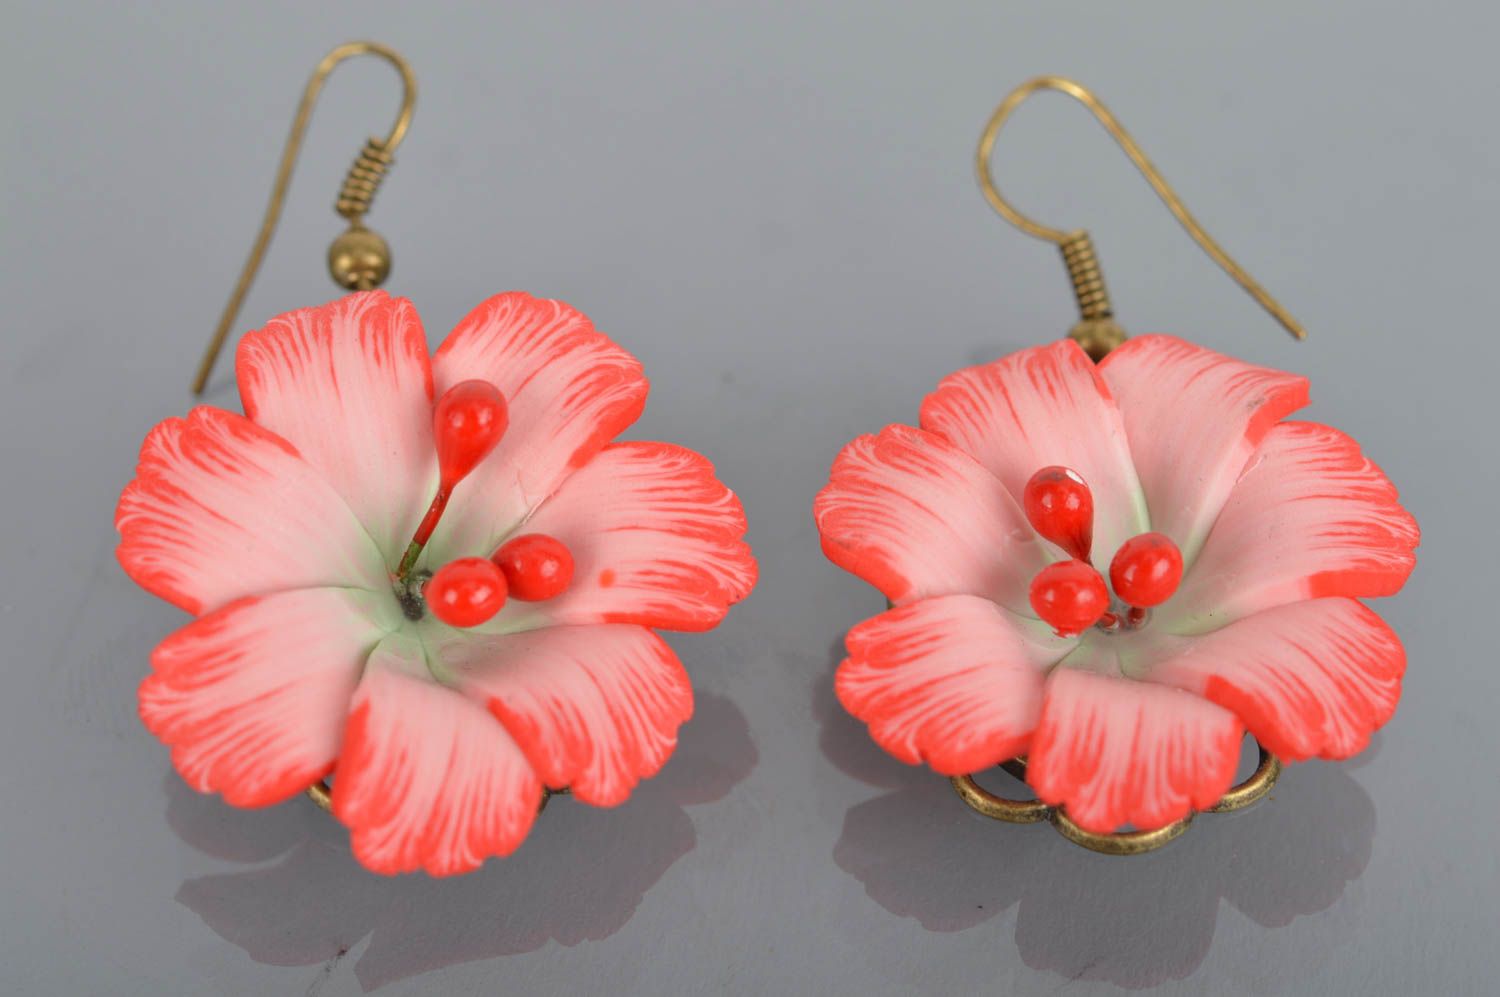 Cute small earrings with flowers made of polymer clay for stylish looks photo 2